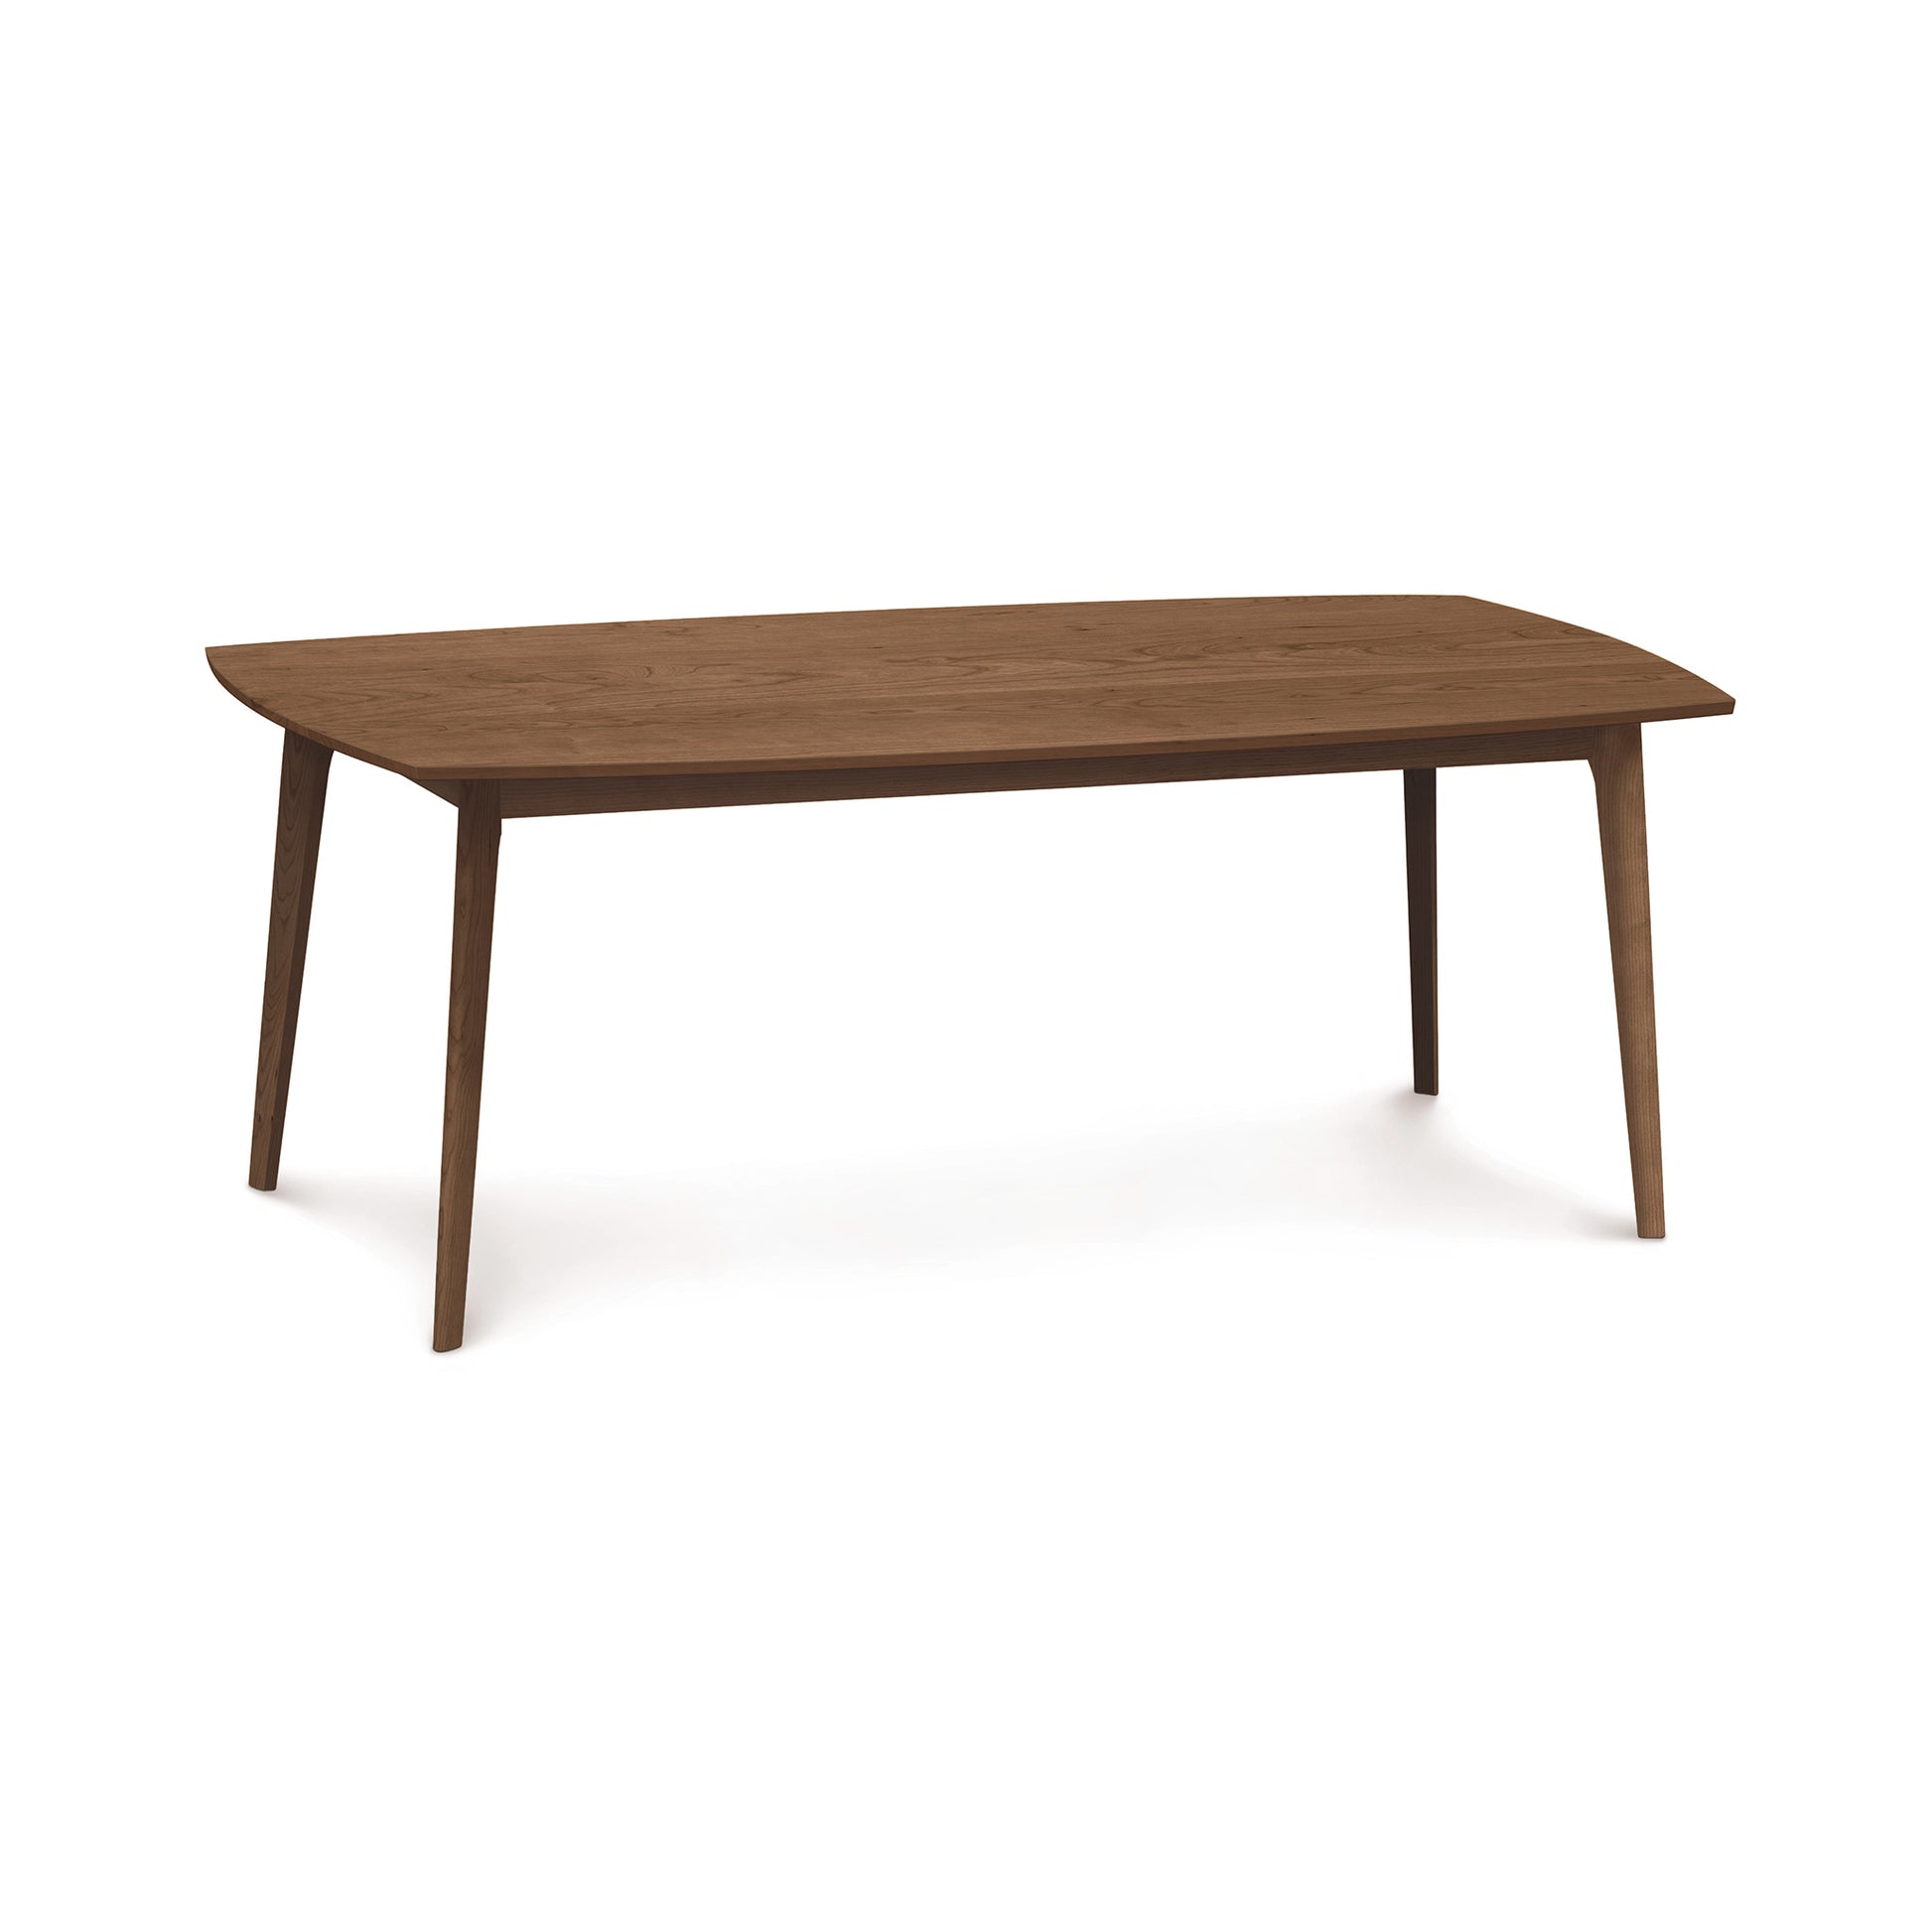 A Catalina Solid-Top Table from Copeland Furniture with a smooth, rectangular top and angled legs on an isolated white background, crafted from sustainably-sourced hardwoods.